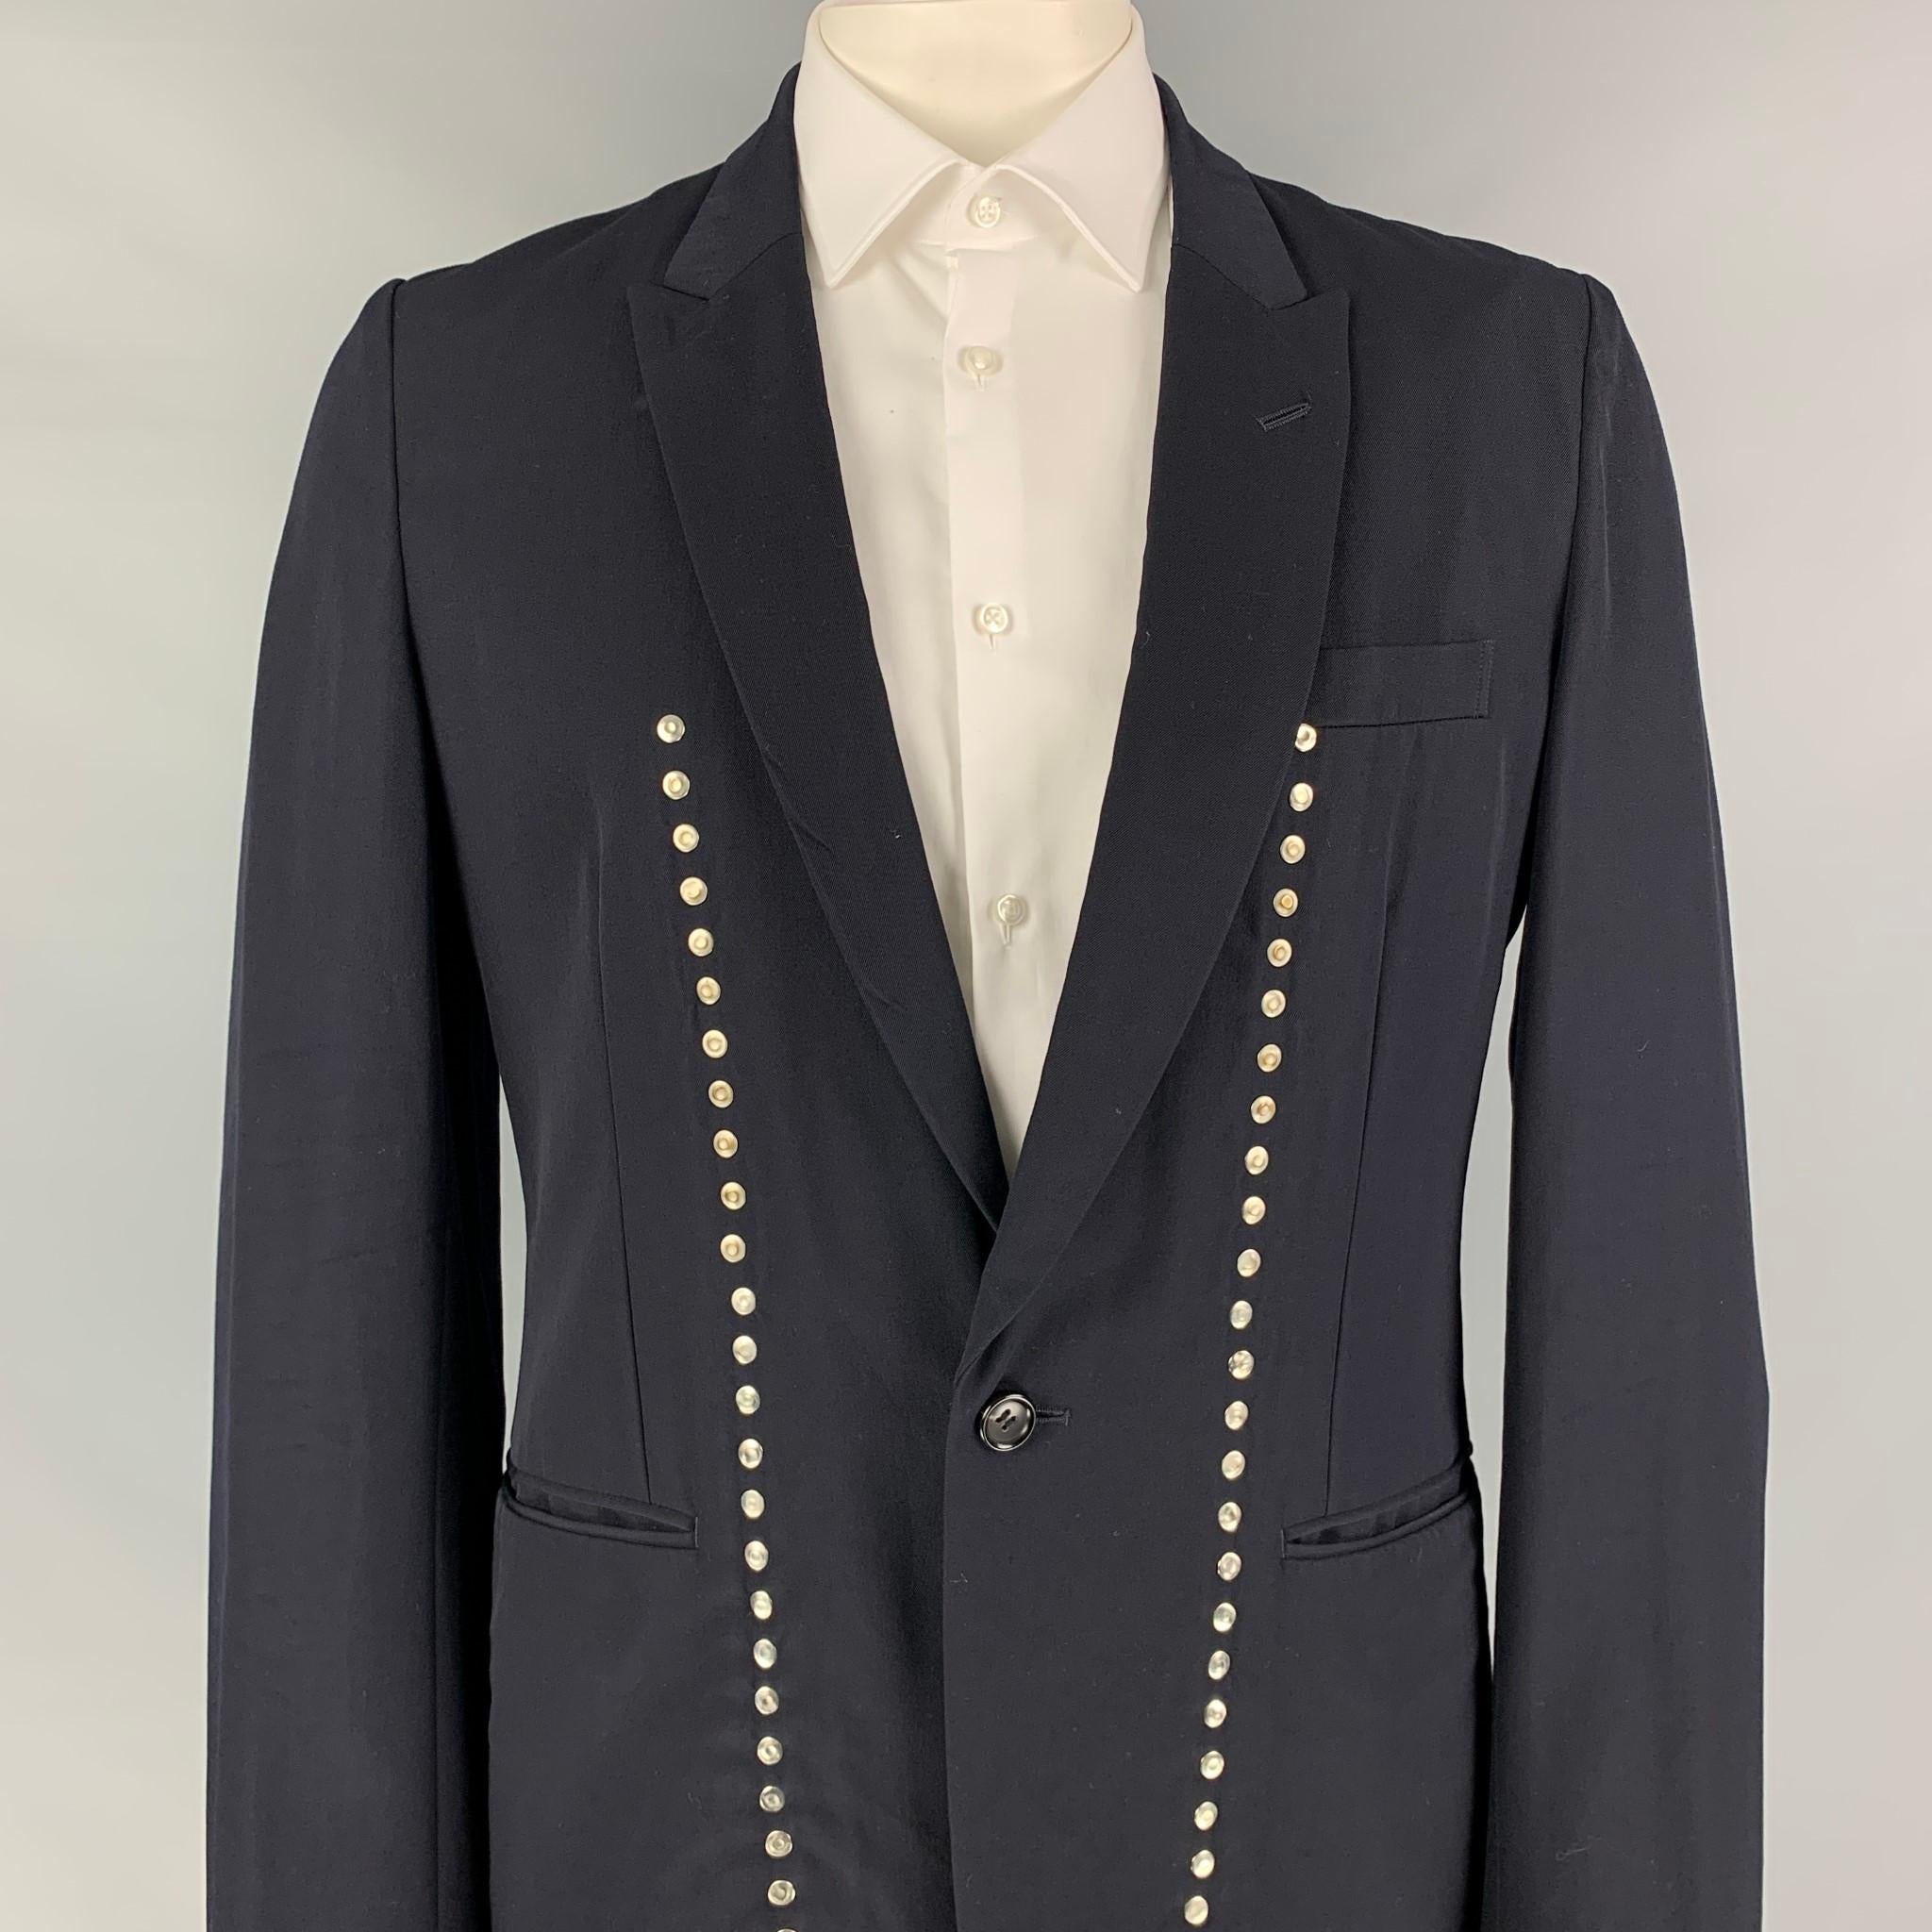 COMME des GARCONS HOMME PLUS EVERGREEN sport coat comes in a navy wool featuring a peak lapel, studded details, slit pockets, single back vent, and a single button closure. Made in Japan. 

Very Good Pre-Owned Condition.
Marked: L /